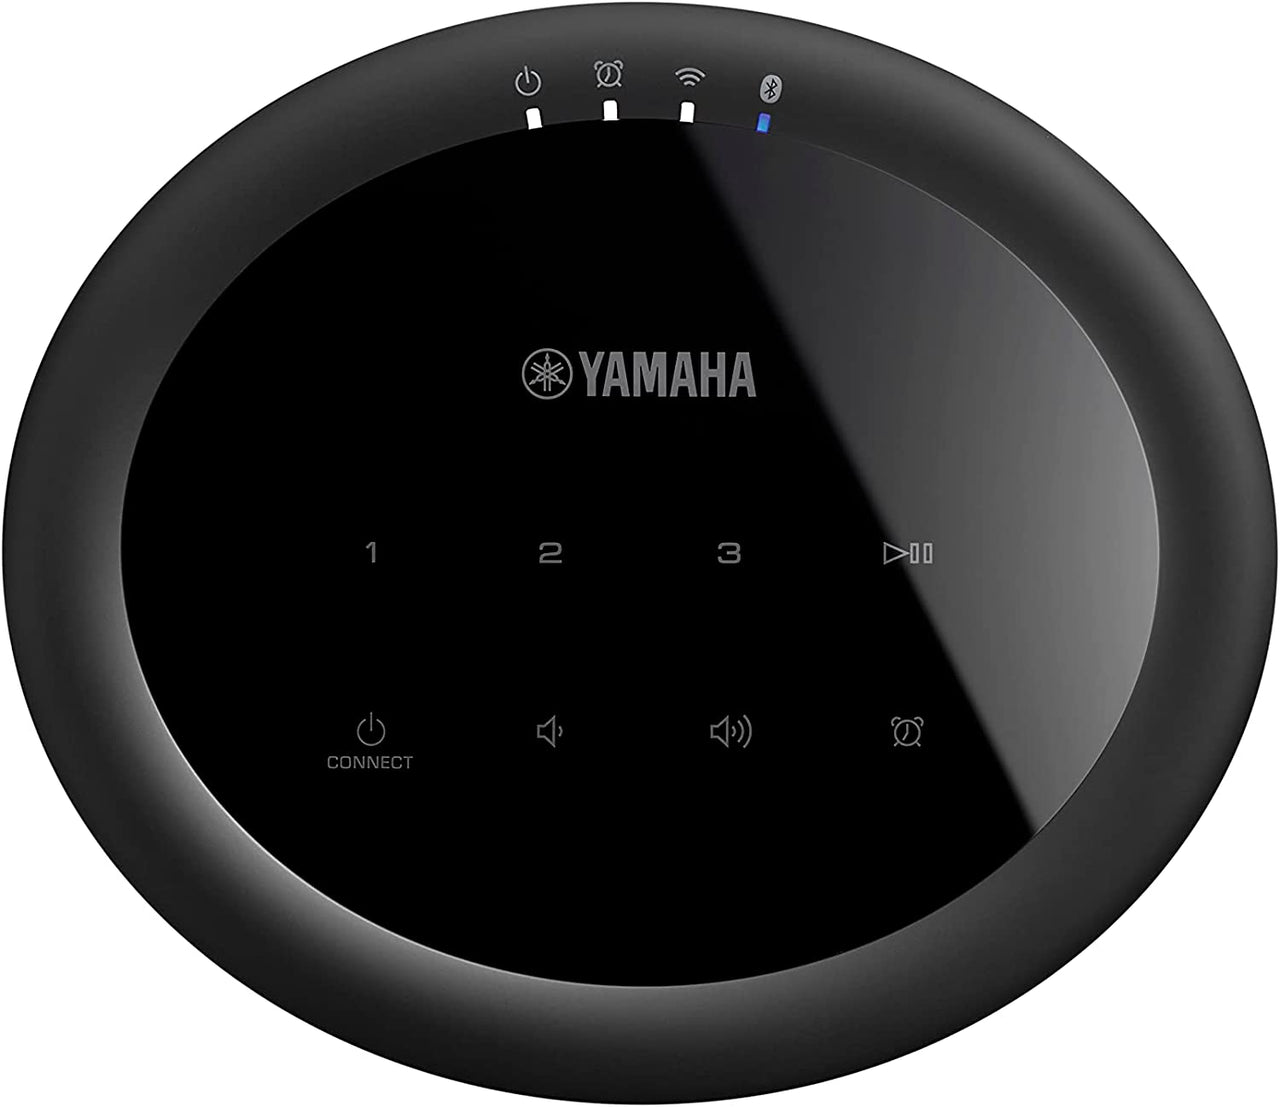 Yamaha WX-021BL wireless powered speakers with Wi-Fi, Bluetooth, and Apple Airplay